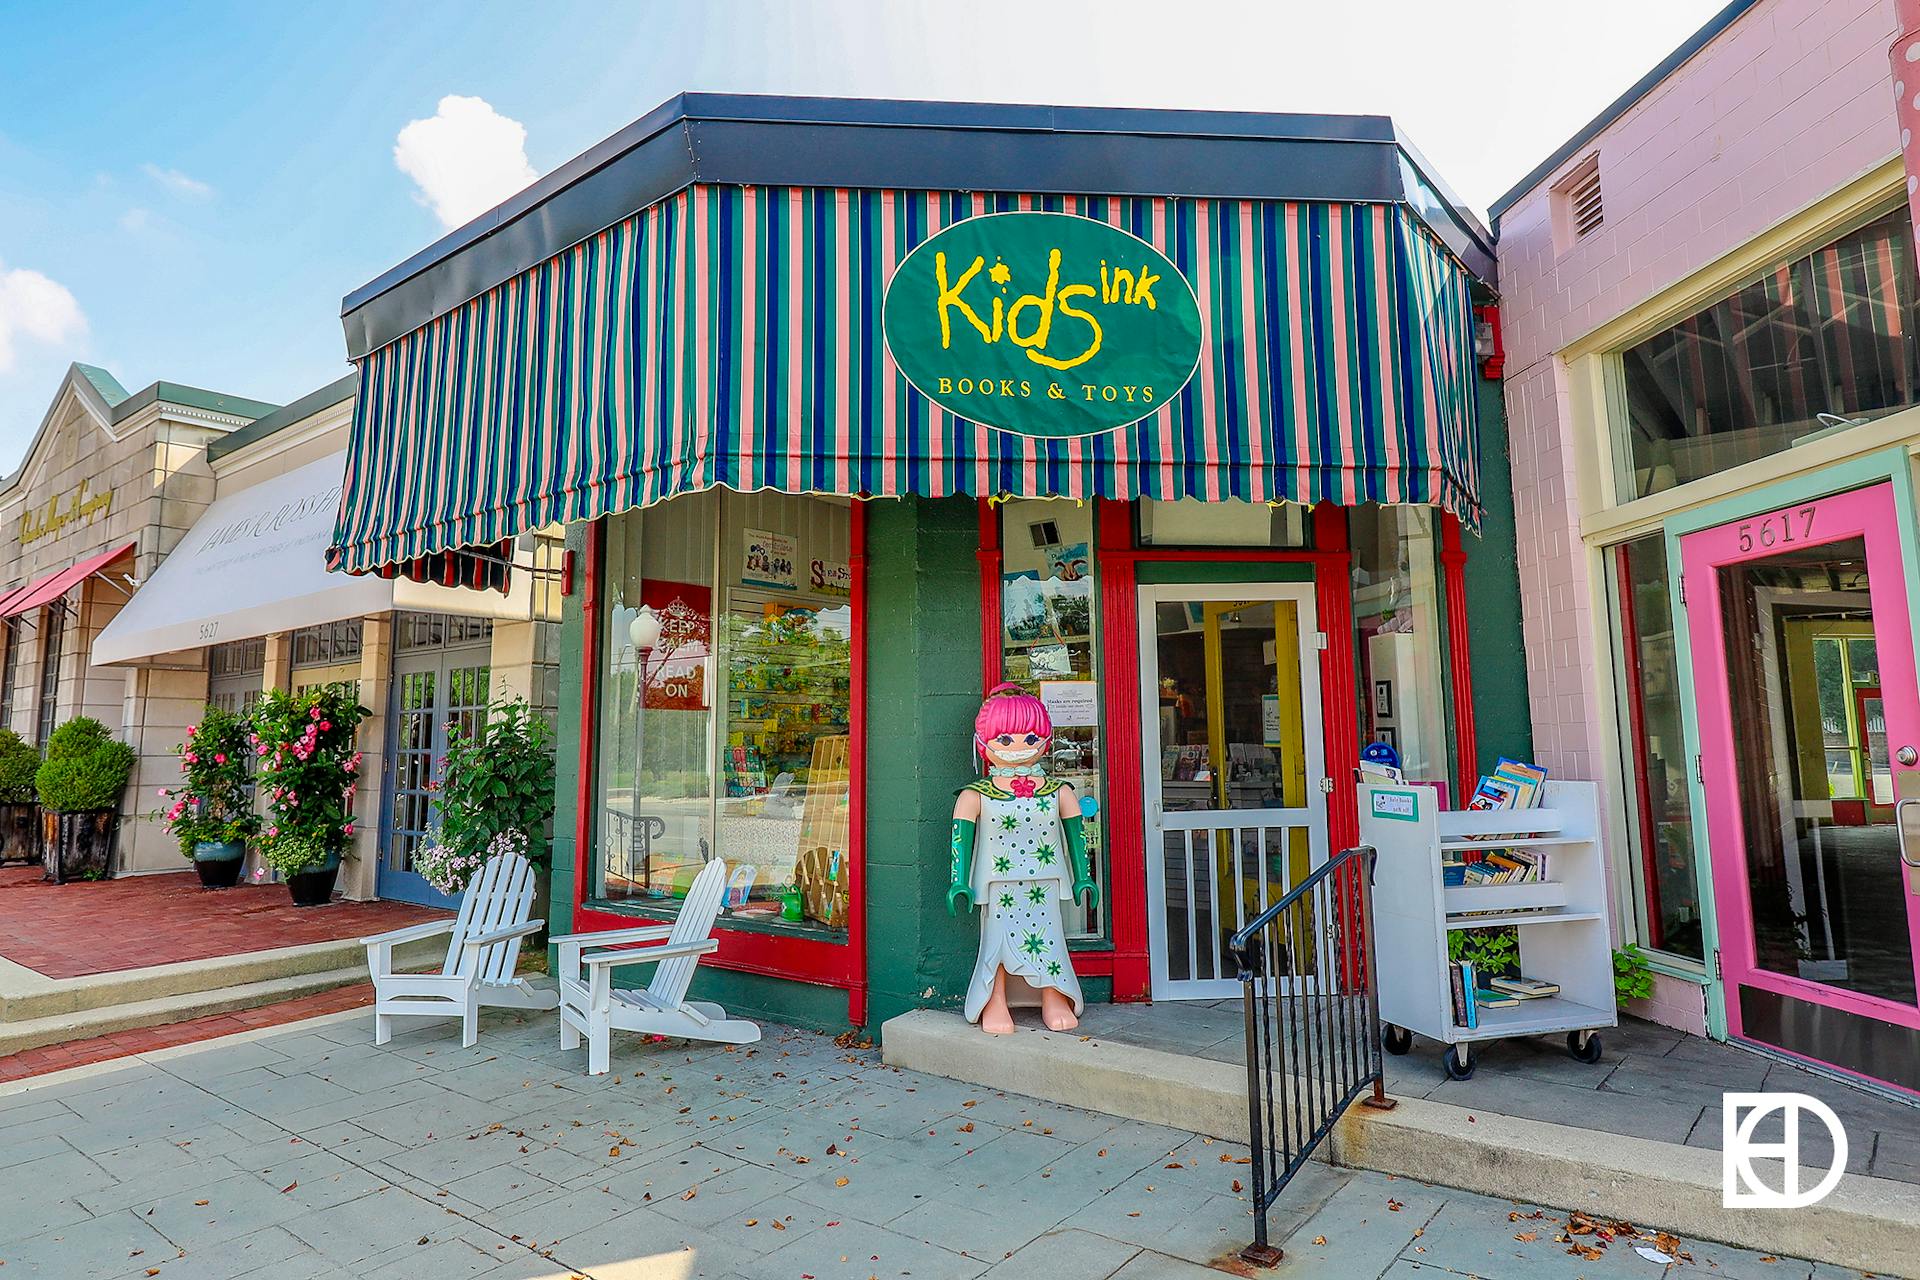 Gif of the exterior of Kids, Ink bookstore